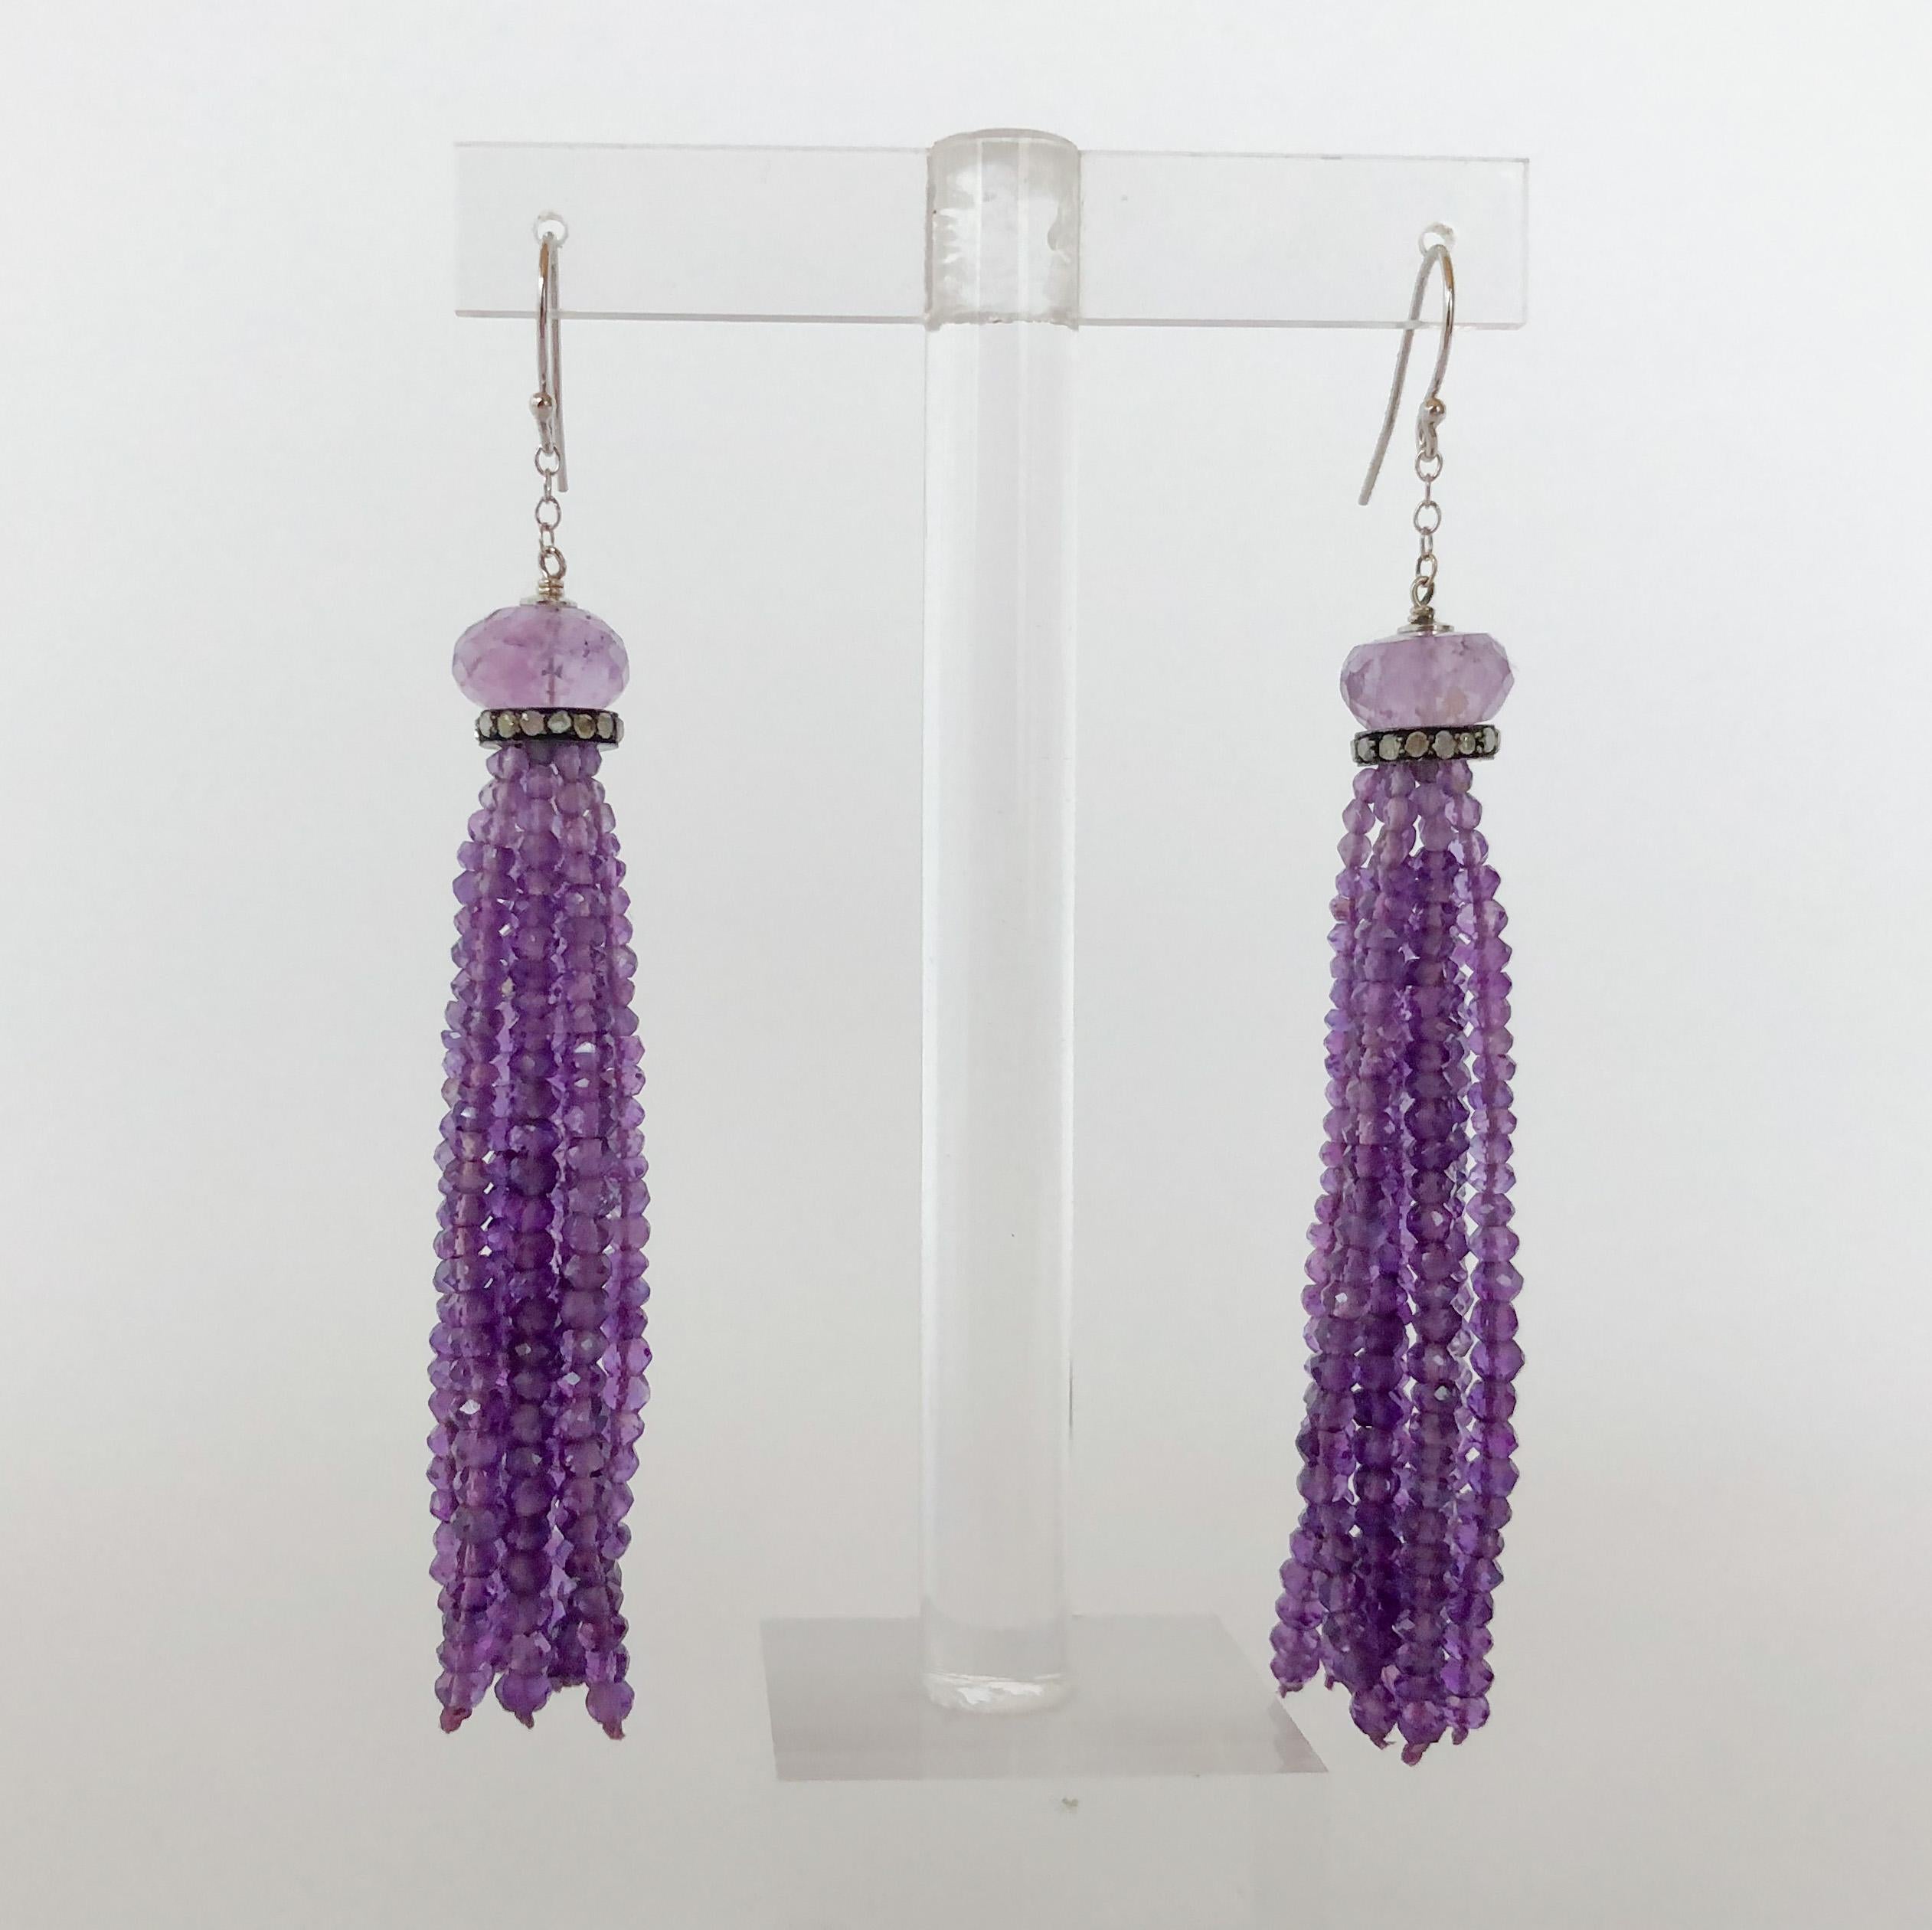 These gorgeous earrings are made of amethyst graduated beads from 2-4 mm in width. The earrings feature an 8 mm amethyst bead with a diamond encrusted roundel. They are 3 inches long and the fish hook backings are made of 14k white gold.